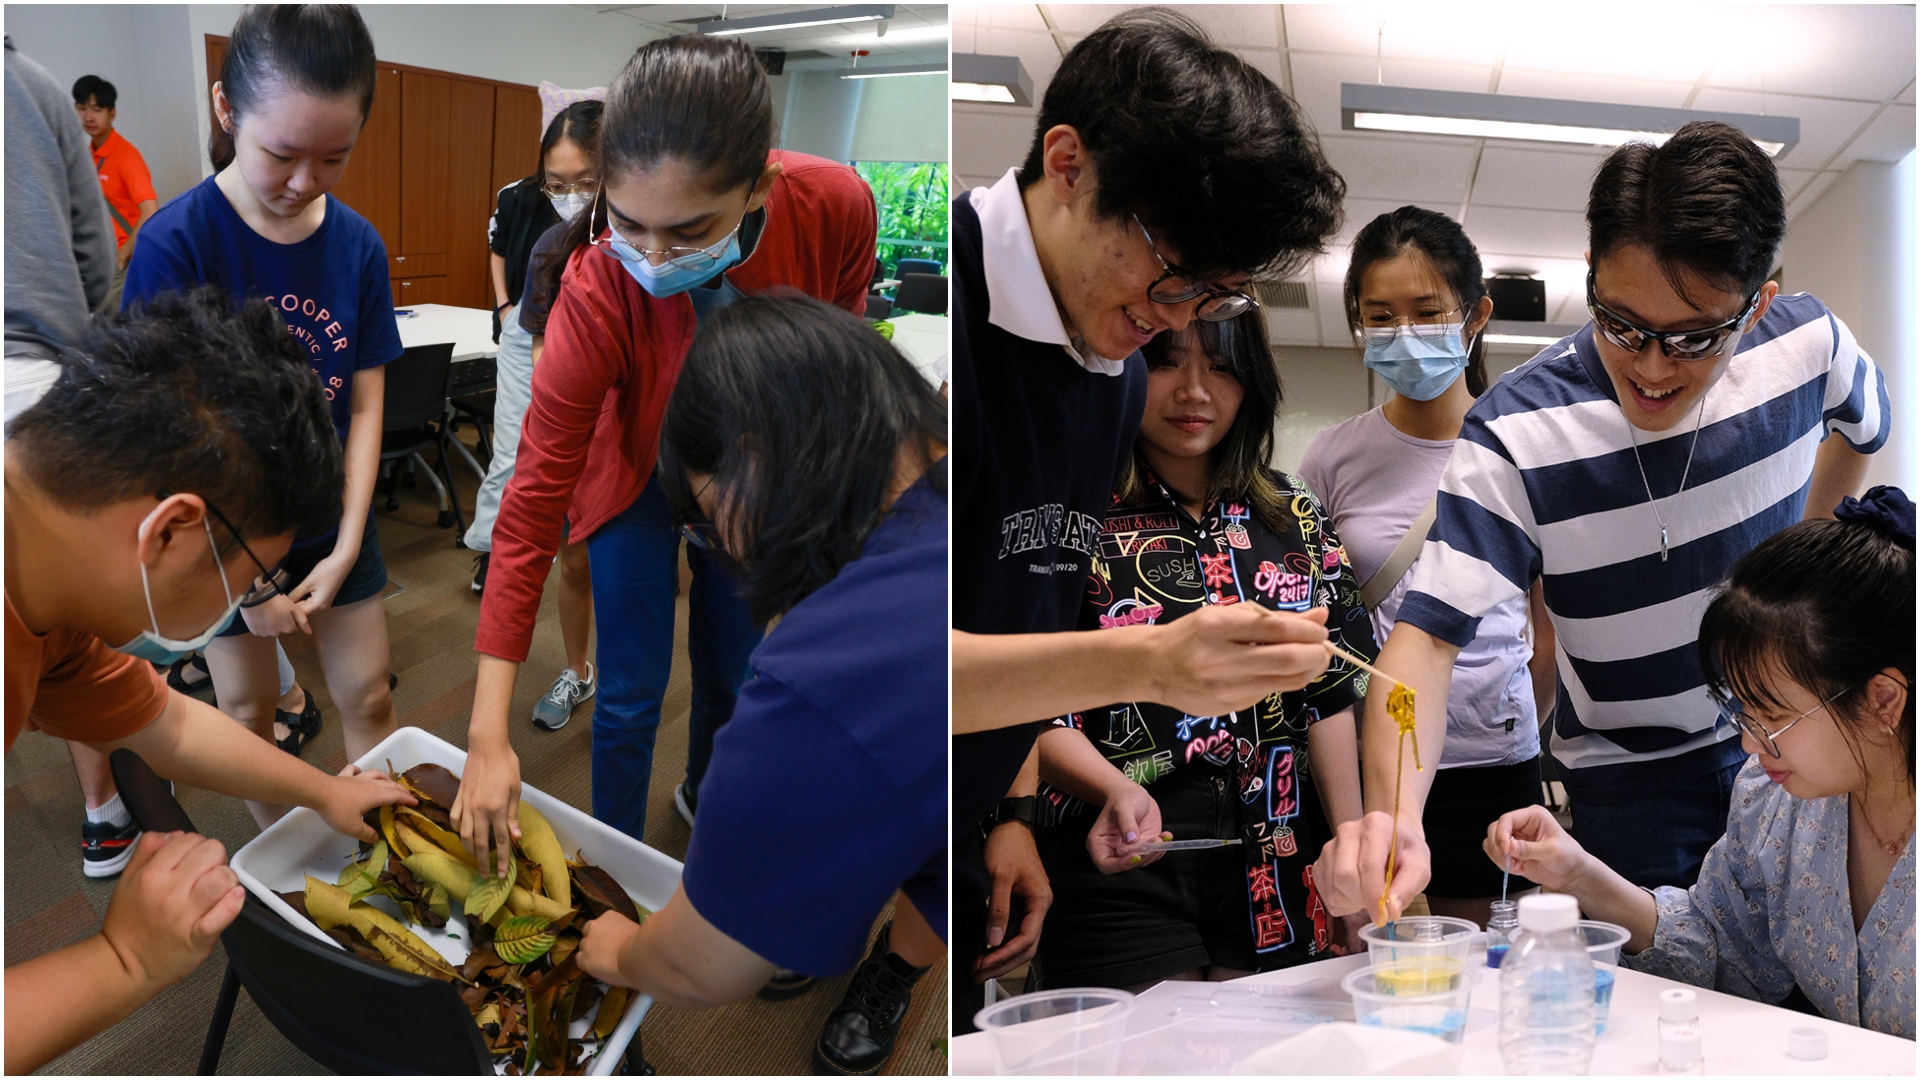 (Left) Participants at an NUS College special class conducted by Dr Ang Yuchen picking out their ‘companion leaf’ as part of a lesson on the importance of love and beauty in observational science. (Right) Participants making ‘pearls’ and ‘noodles’ during a class conducted by Associate Professor Tok Eng Soon, who teaches the Nanoscale Science And Technology course.